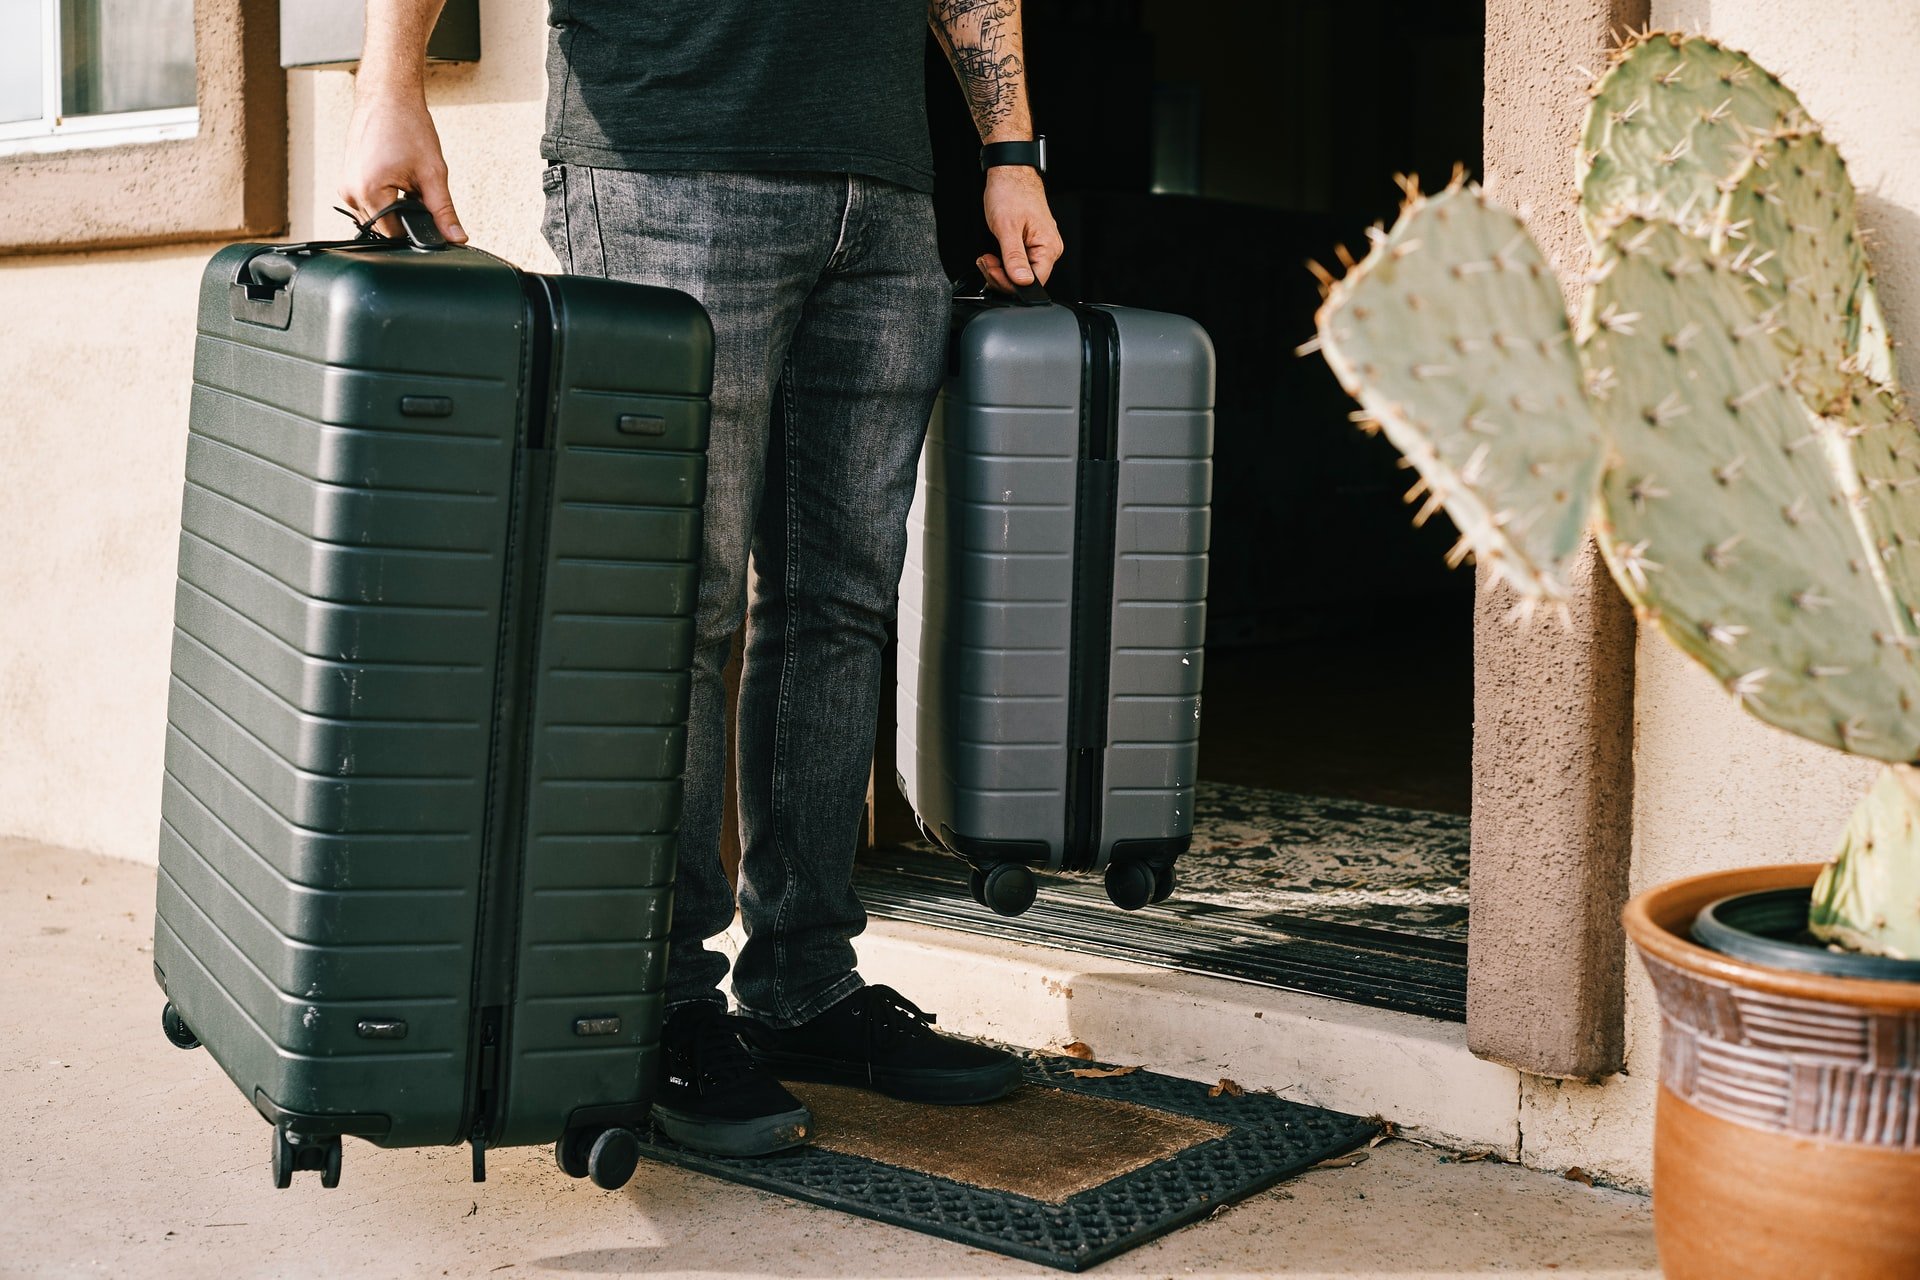 A man holding two luggage cases | Source: Unsplash